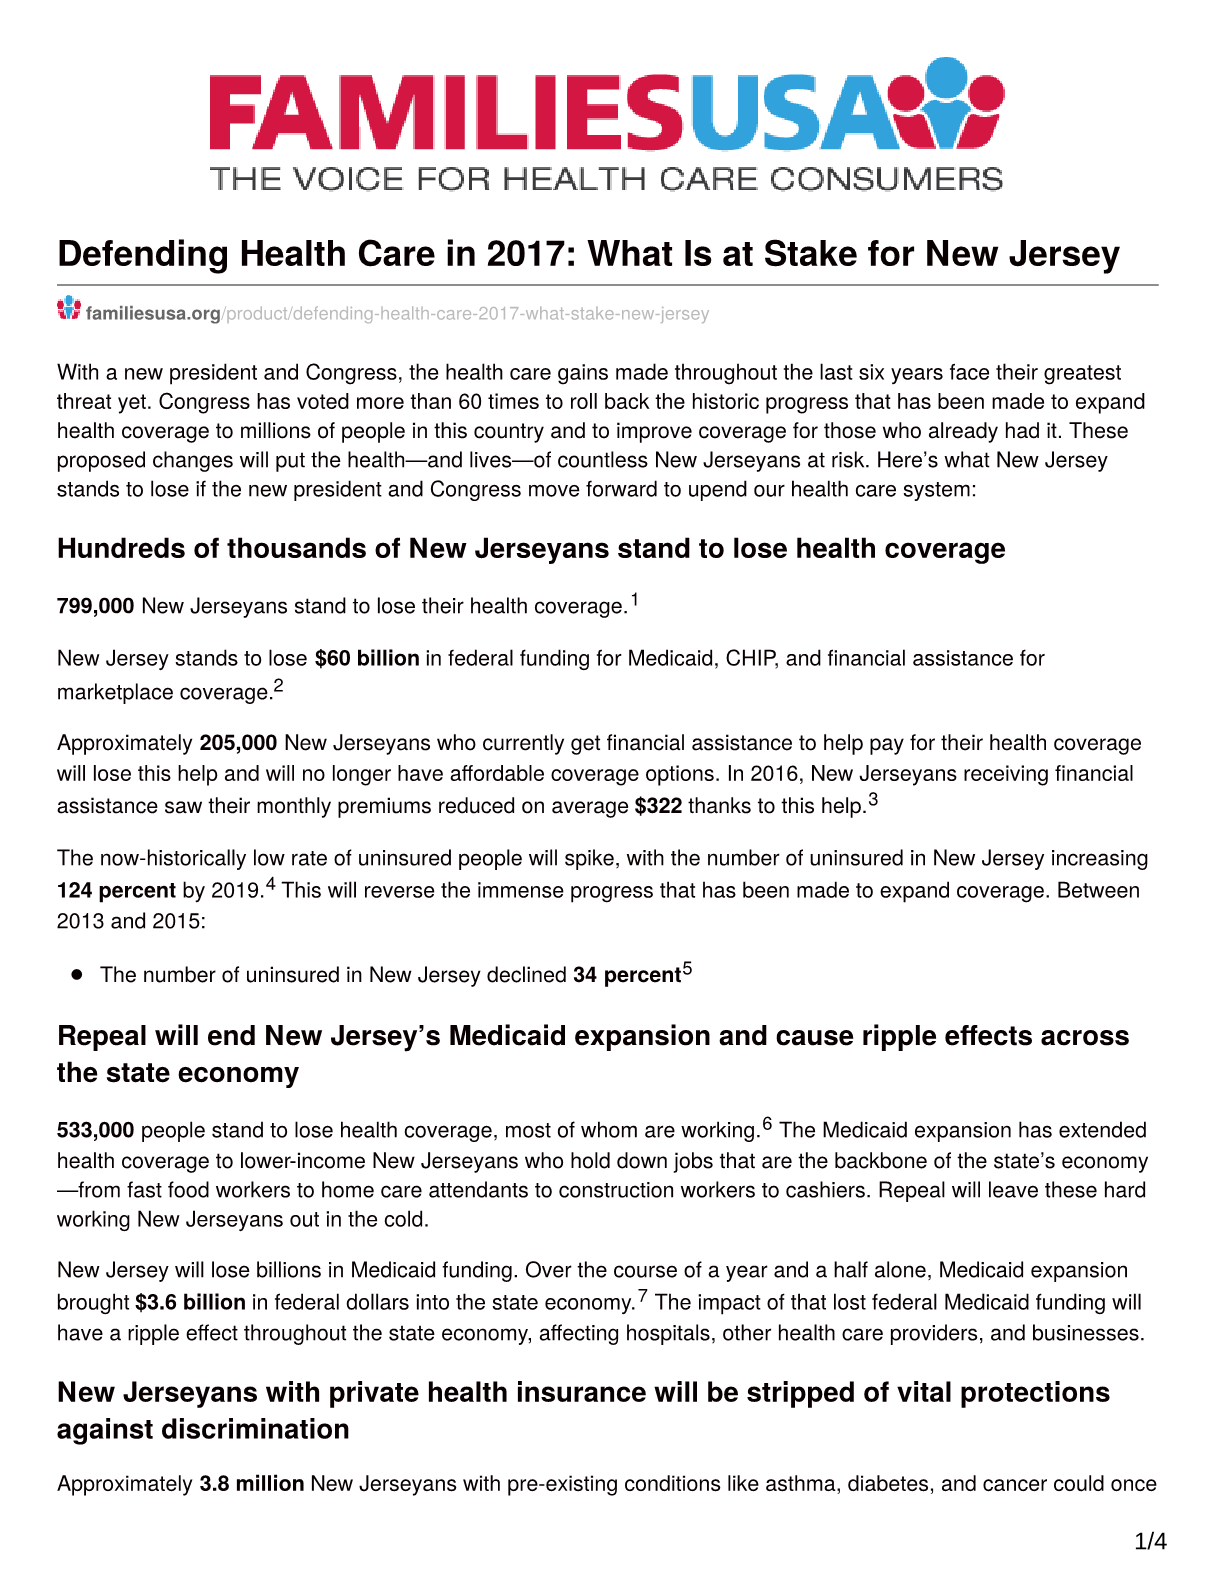 Defending Healthcare in 2017 - What is at Stake for New Jersey?